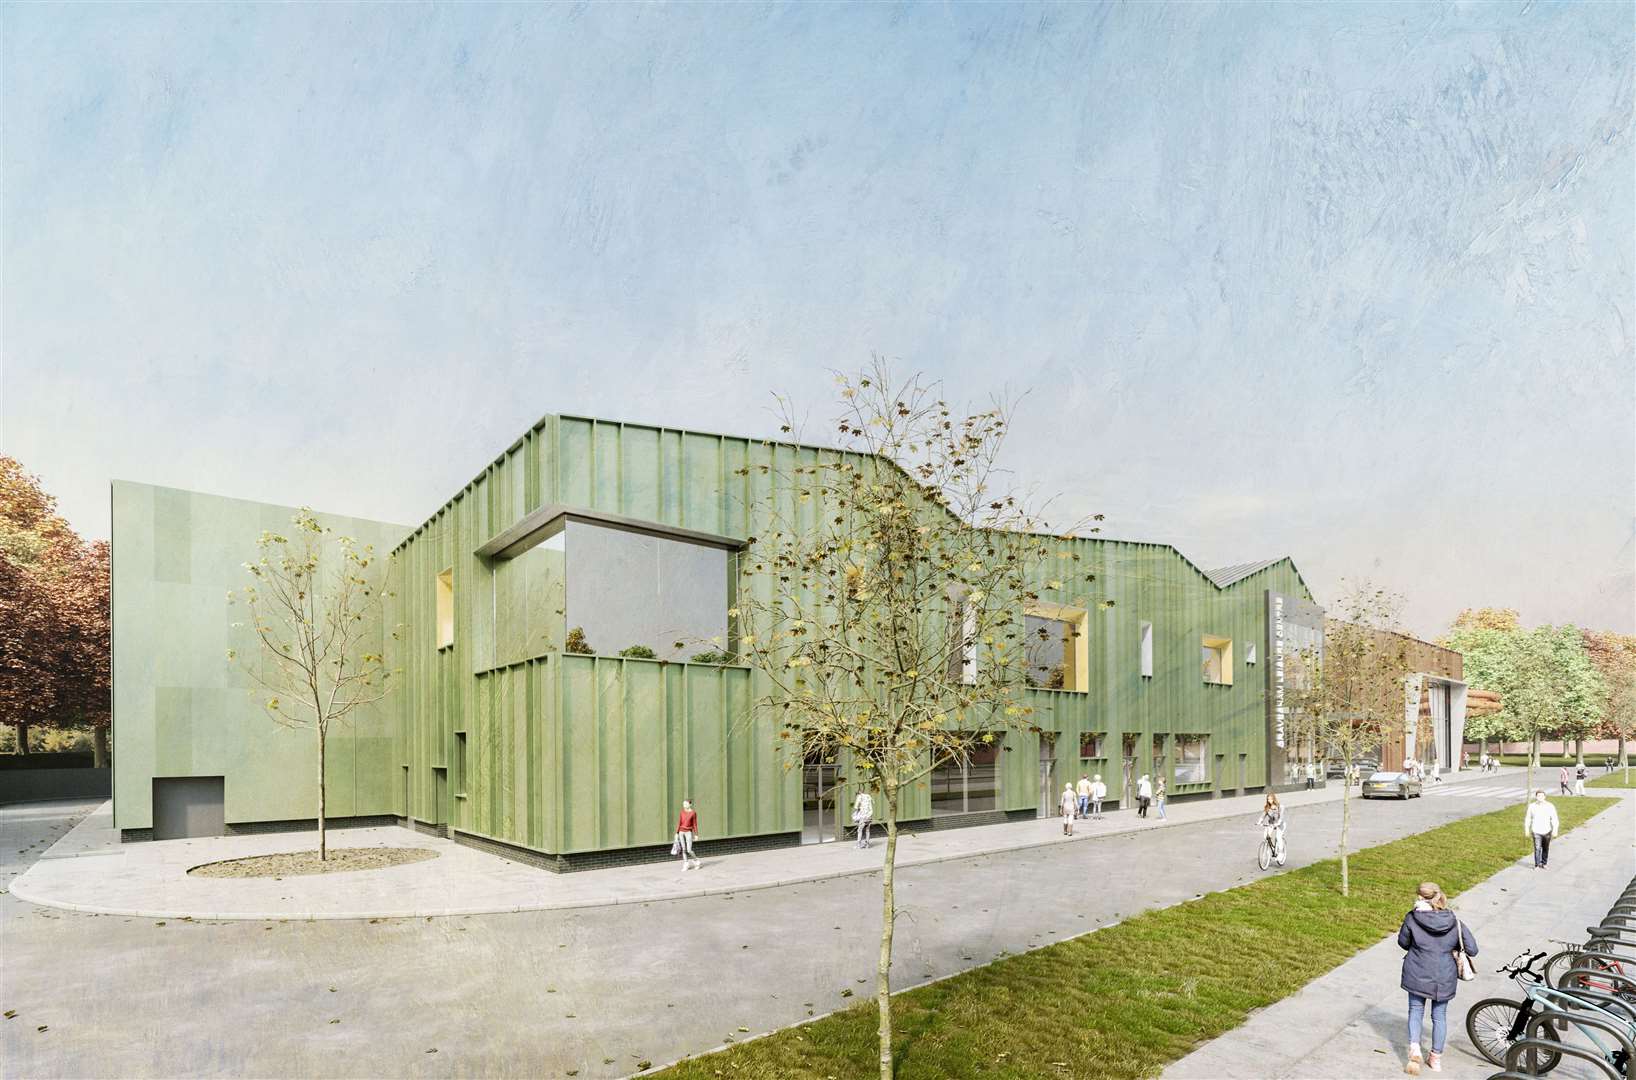 What the community, fitness suite and sports hall could look like from the outside. Pictures: Gravesham Borough Council